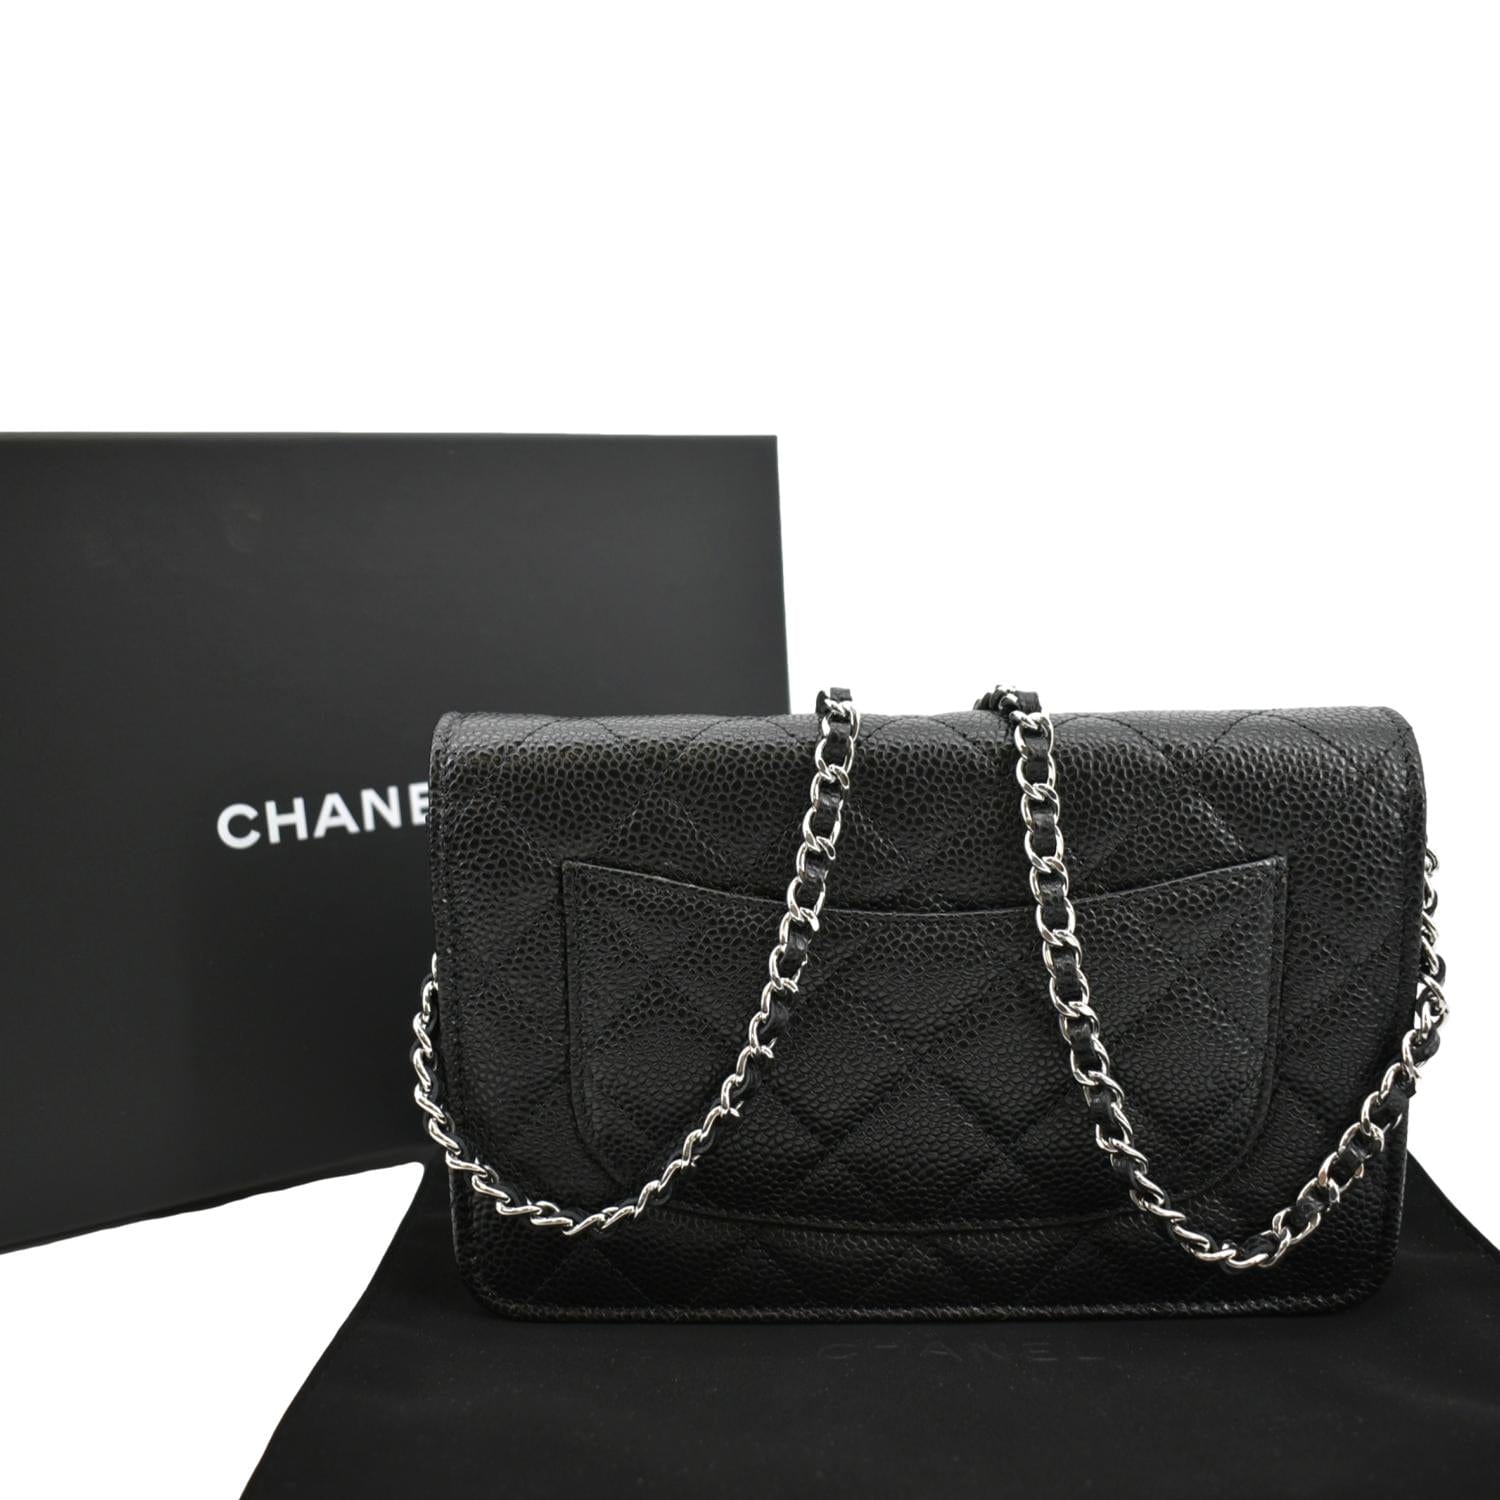 CHANEL Wallet On Chain Quilted Leather Crossbody Bag Black